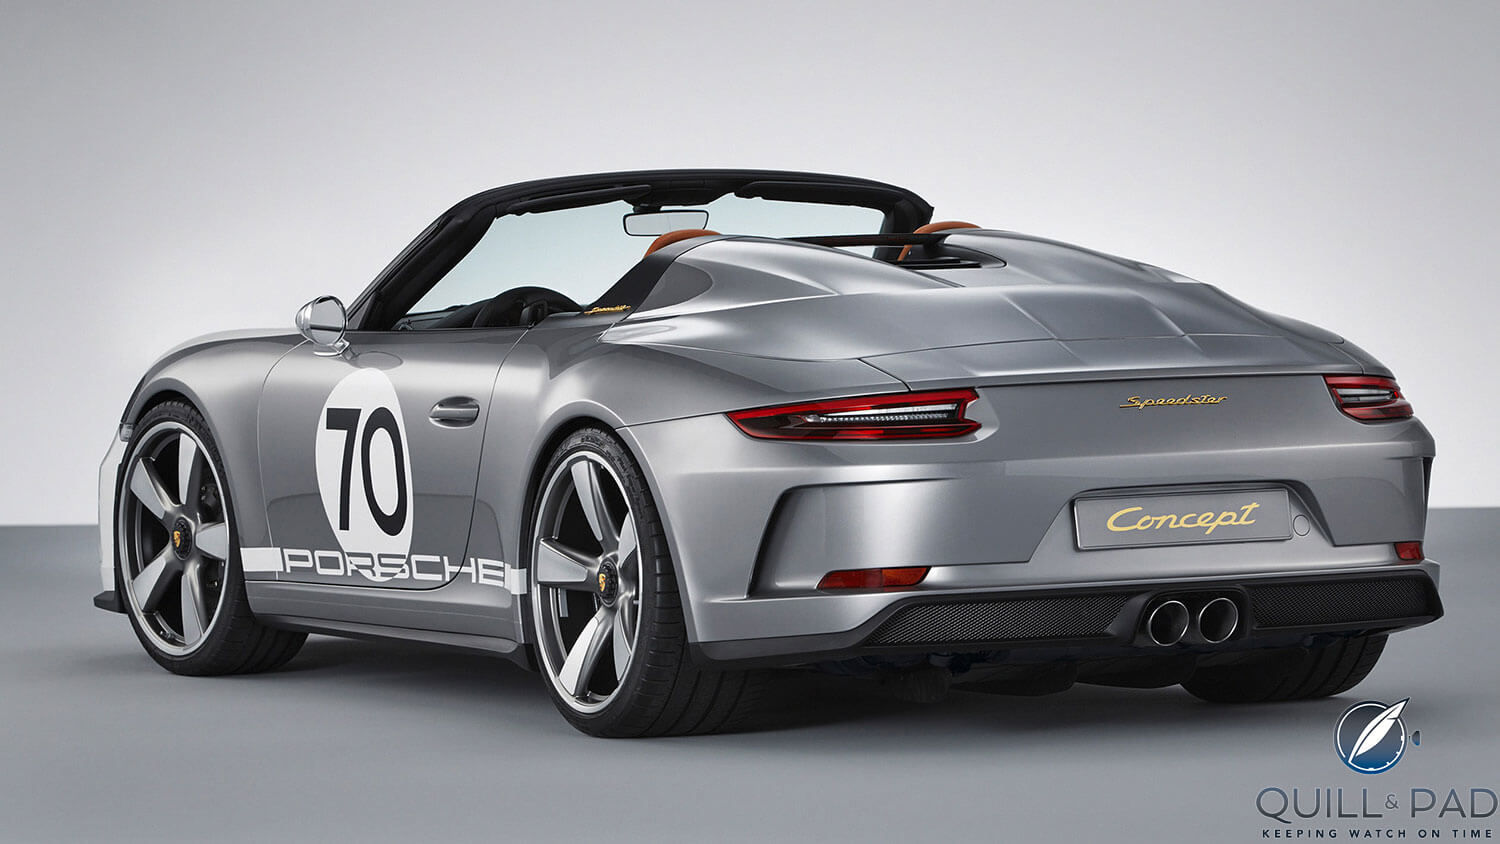 View from the back of the Porsche 911 Speedster Concept